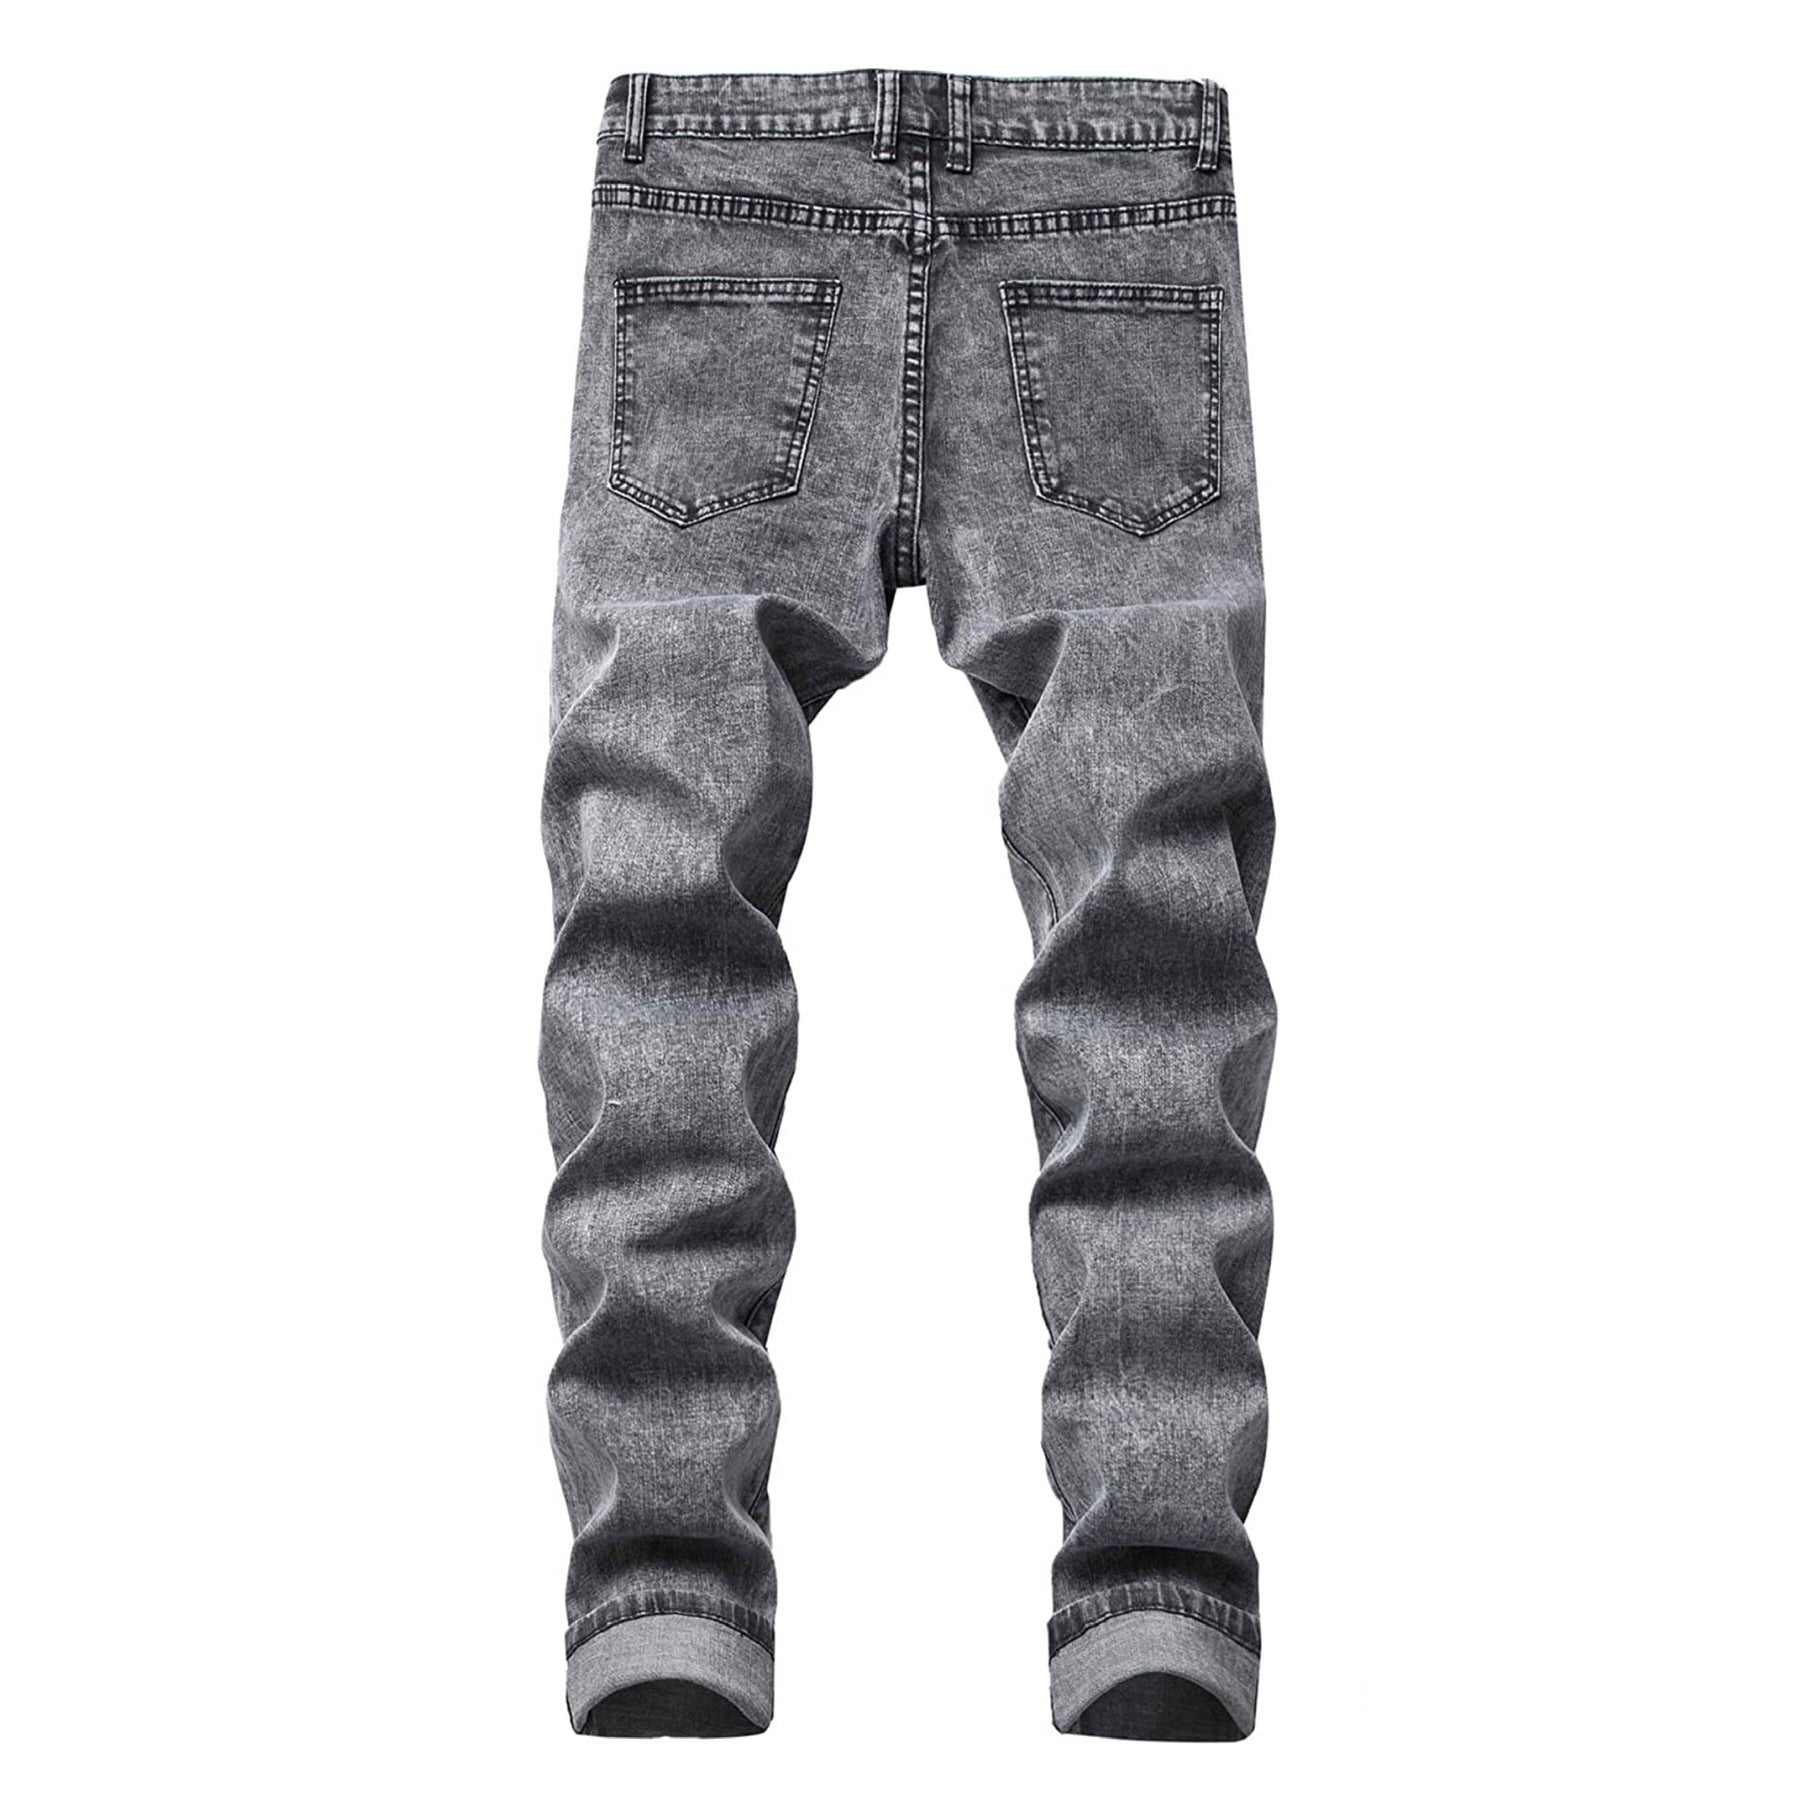 The Vintage Grey Denim Pant - Up to Size 42